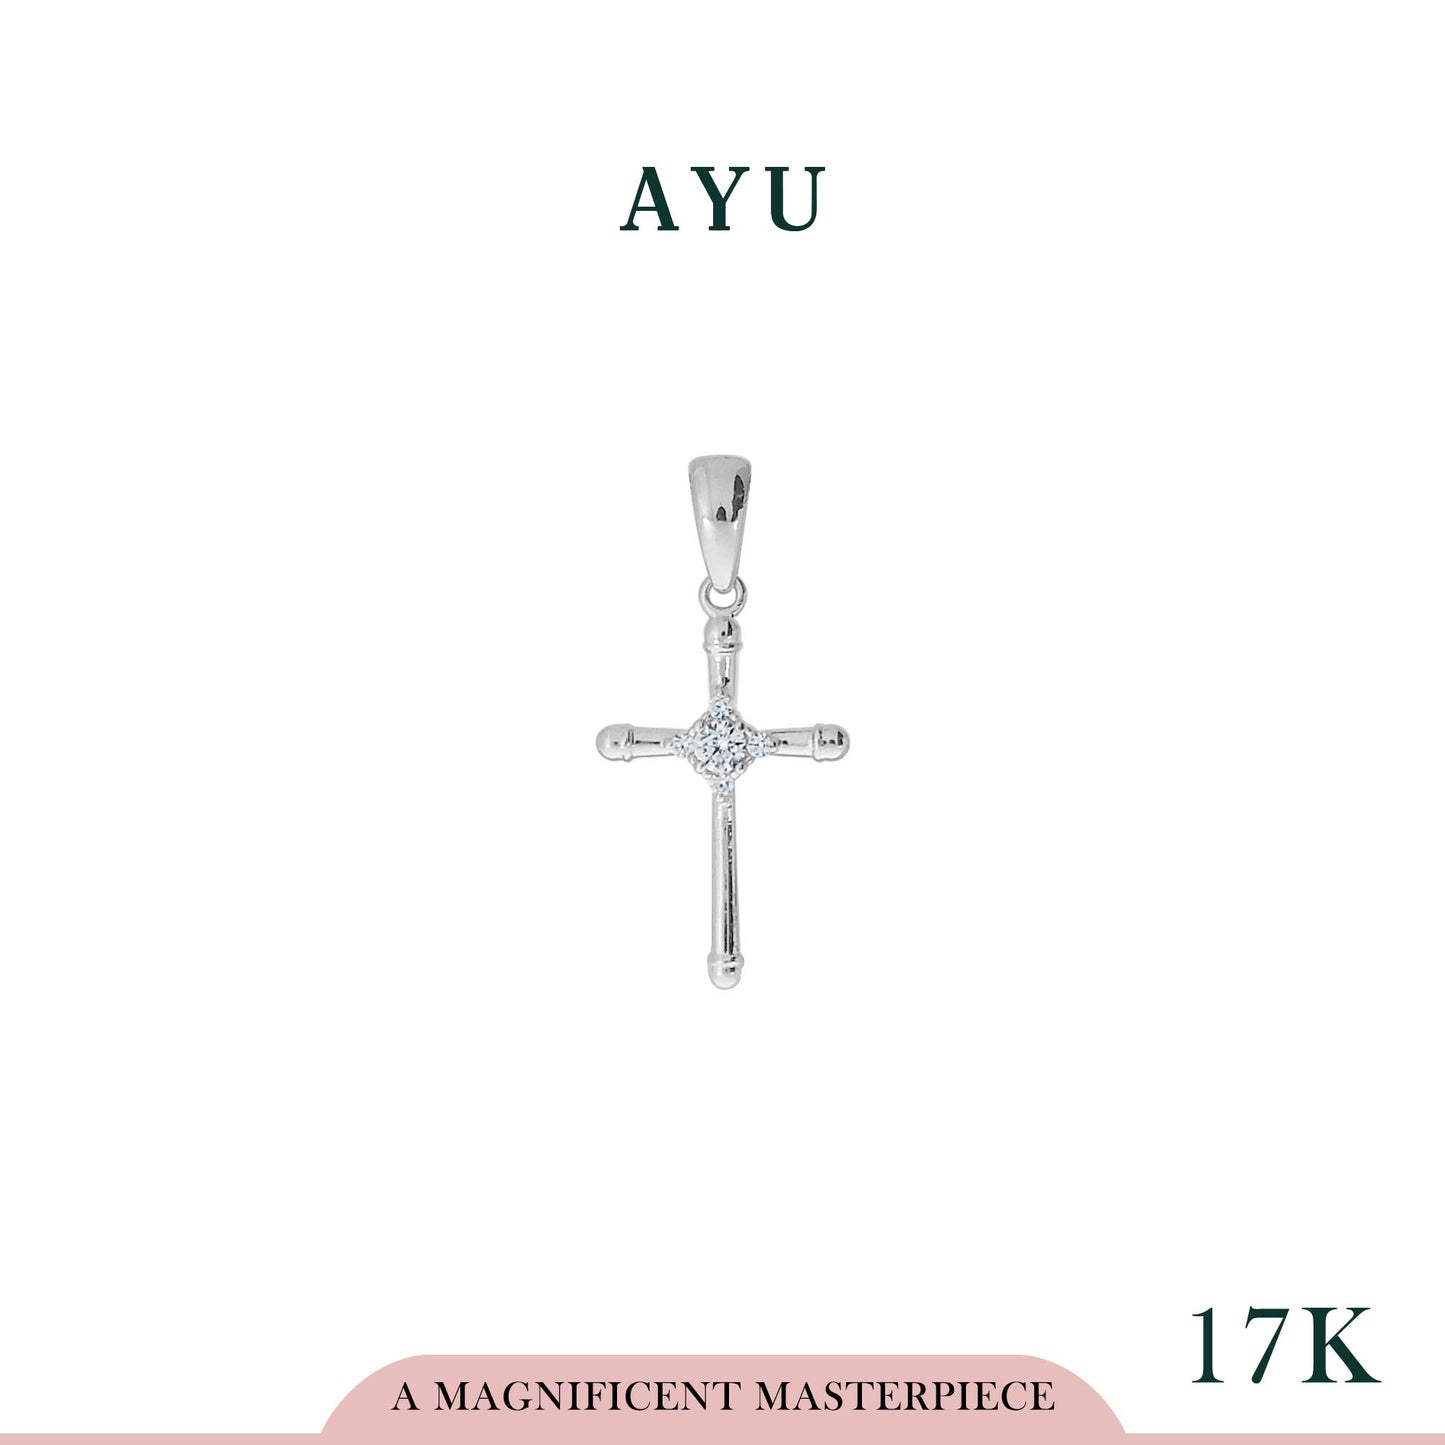 AYU Liontin Emas - Cross With Solitaire Pendant 17K White Gold